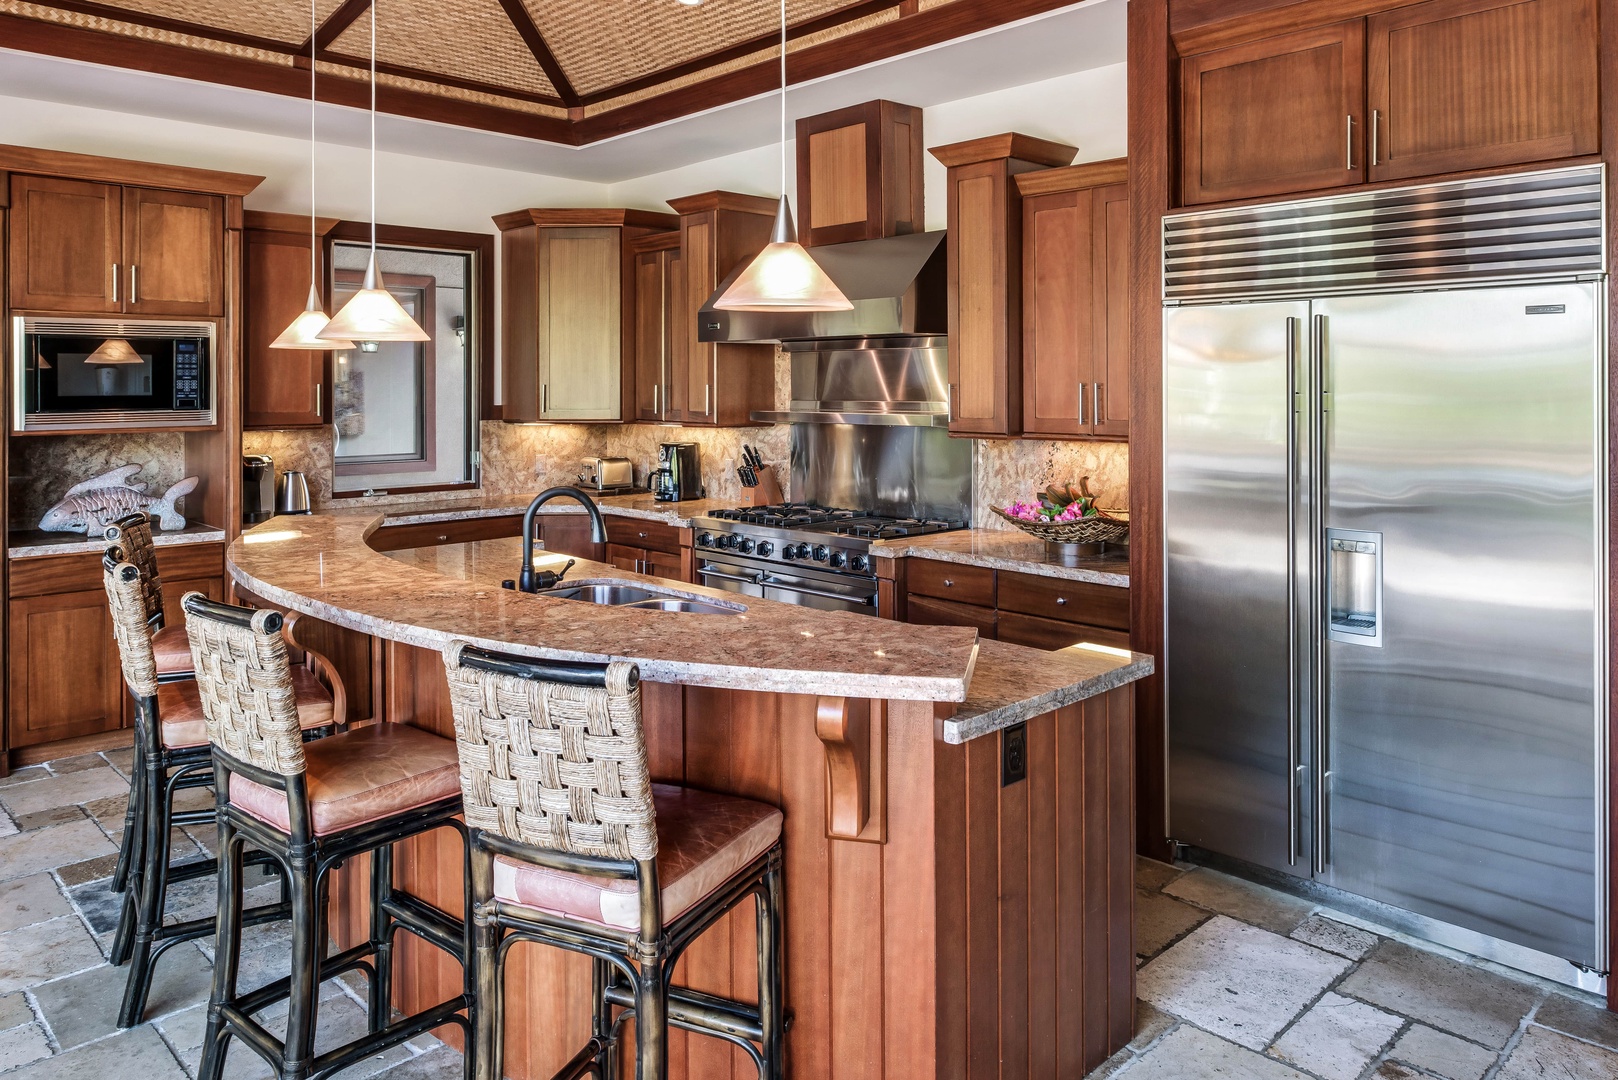 Kamuela Vacation Rentals, House of the Turtle at Champion Ridge, Mauna Lani (CR 18) - Gourmet Kitchen Designed for Cooking and Entertaining